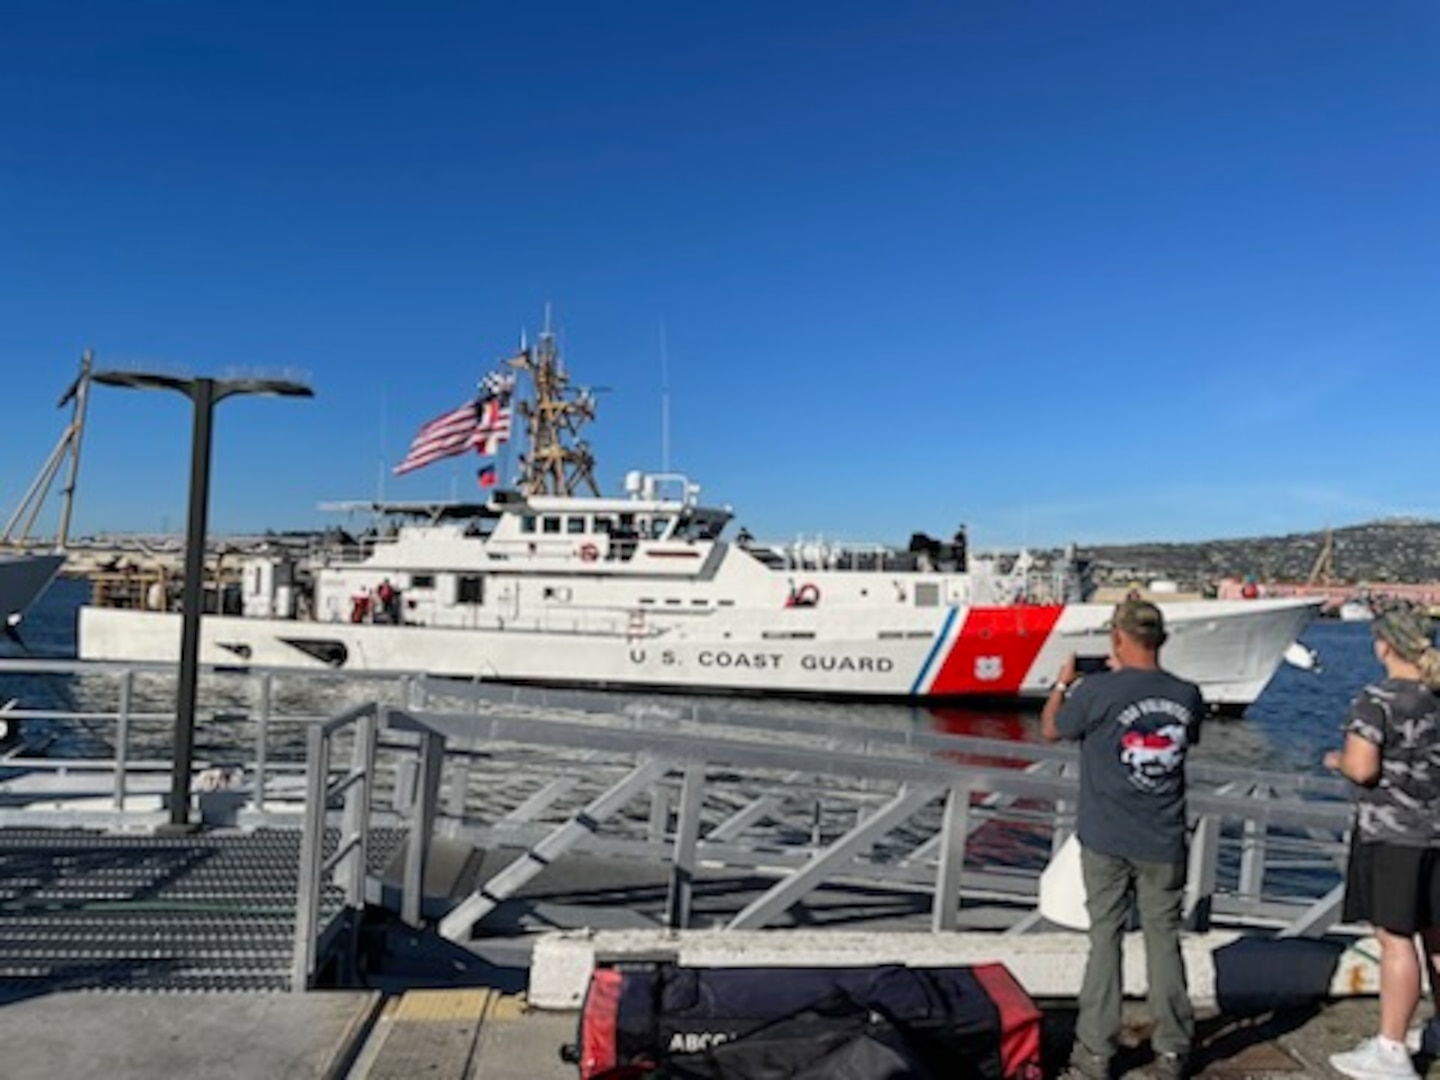 The U.S. Coast Guard Cutter Terrell Horne and crew returned to their home port in Los Angeles/Long Beach Tuesday after a 52-day patrol across the Eastern Pacific. 



The crew of the Terrell Horne deployed in support of multiple missions, including Operations Green Flash, Albatross, Martillo, and Southern Shield, within the 11th Coast Guard District's area of responsibility. During the patrol, Terrell Horne's crew conducted a range of missions encompassing law enforcement, counter-drug operations, illegal, unreported, and unregulated fishing enforcement, and search and rescue operations.